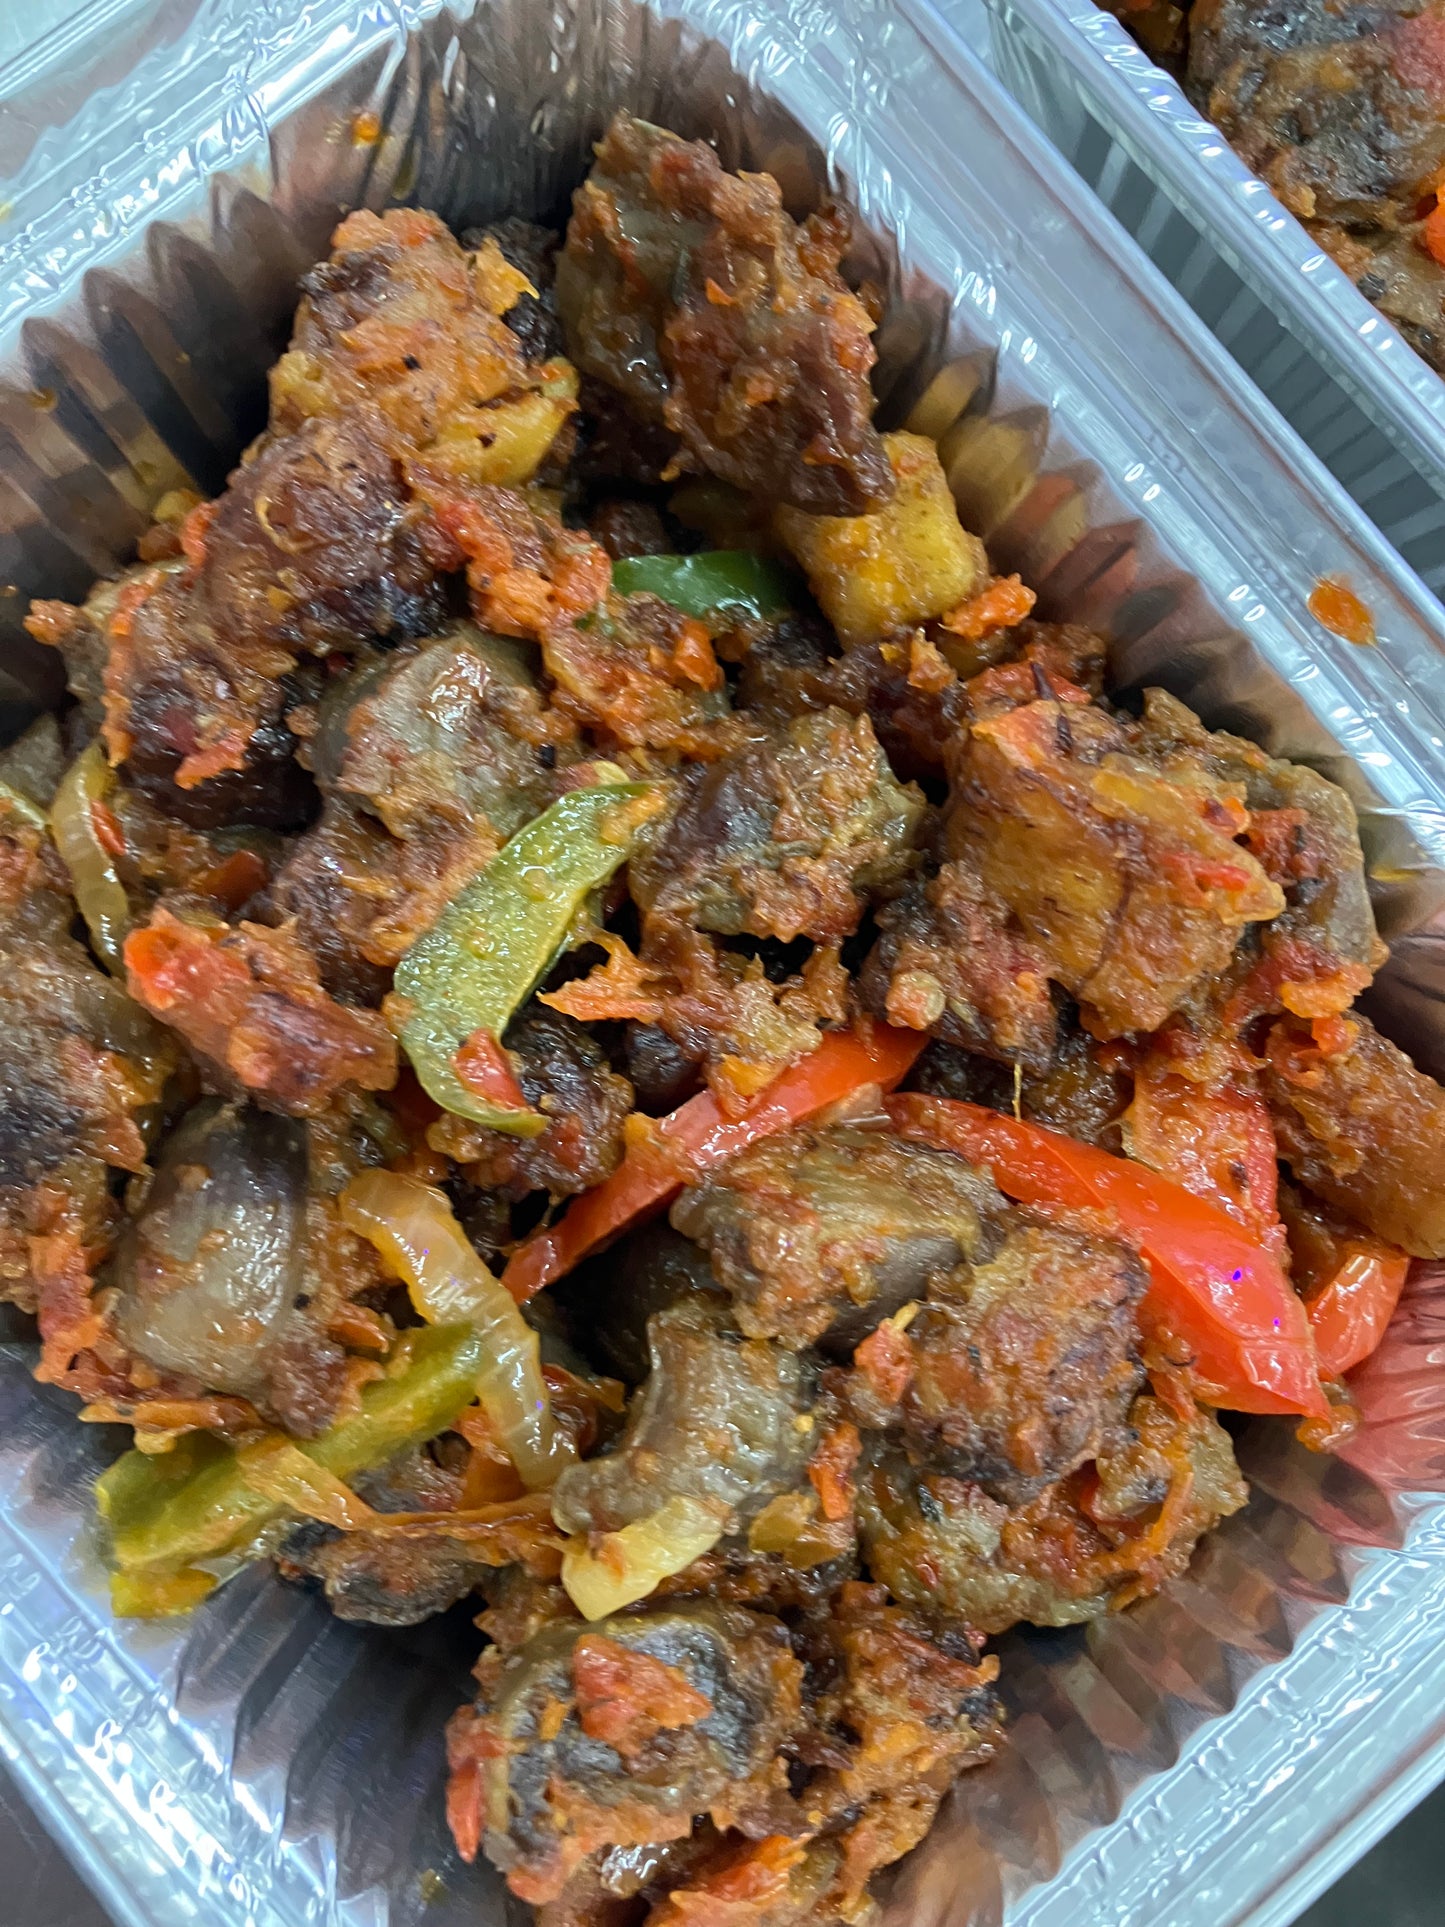 Chicken gizzard stewed with fried plaintain